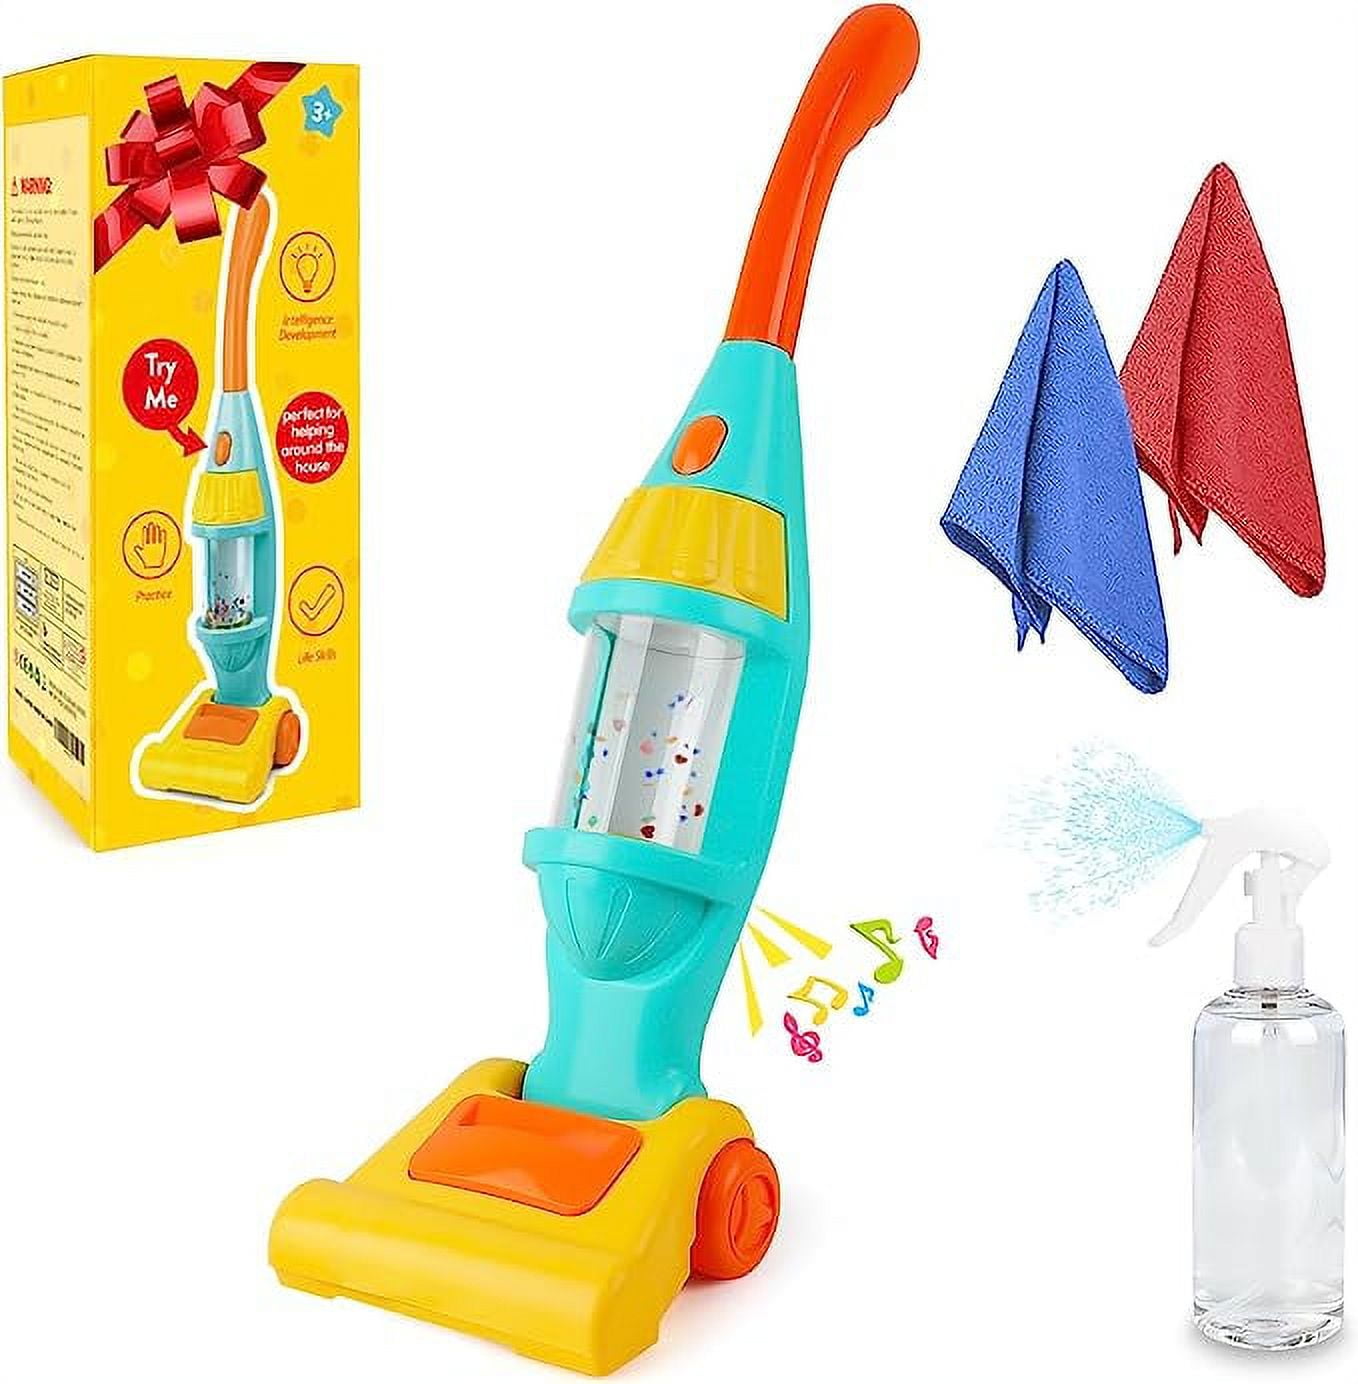 Fridja Children's Cleaning And Sanitation Toy Set Simulation Cleaning  Products